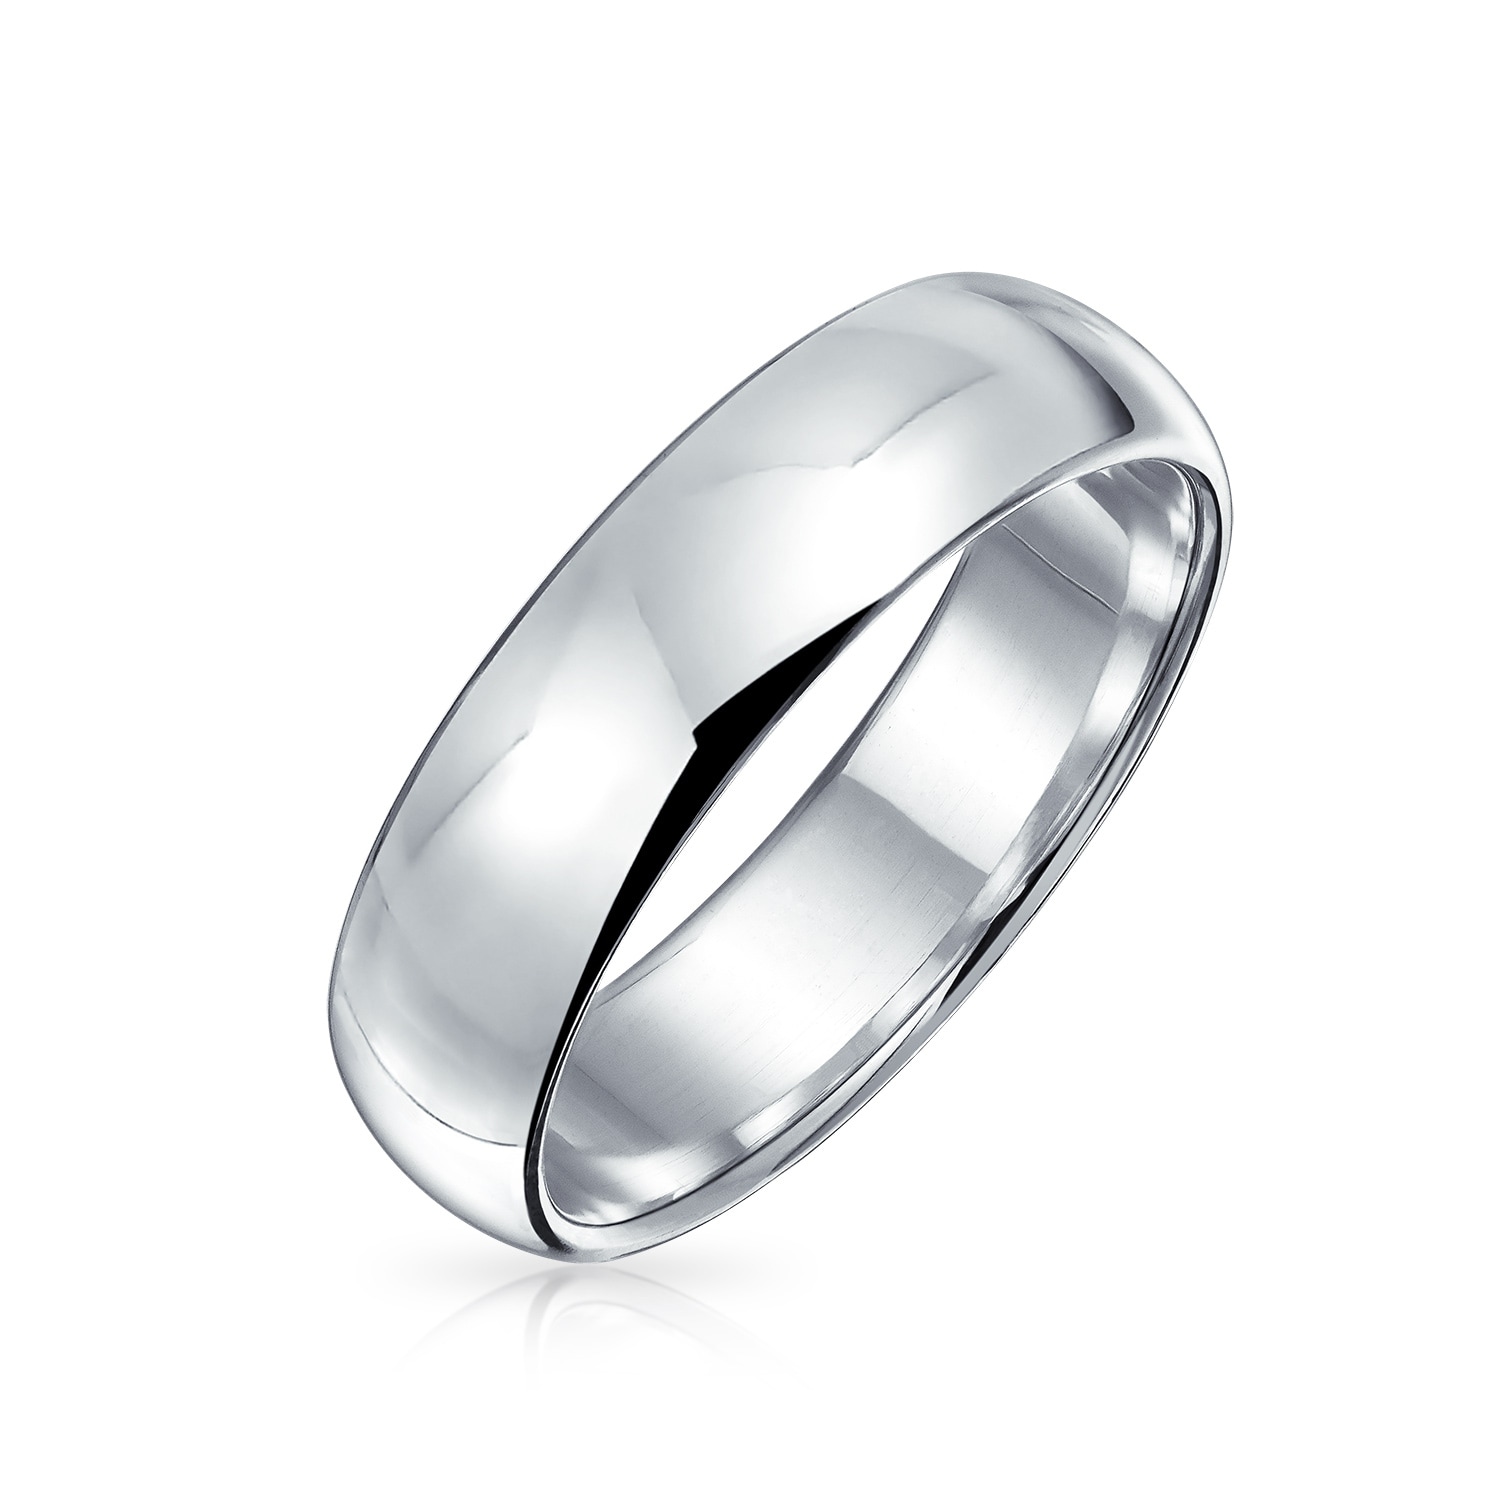 Couples Wedding Band Ring Solid 925 Sterling Silver 5MM Comfort Fit